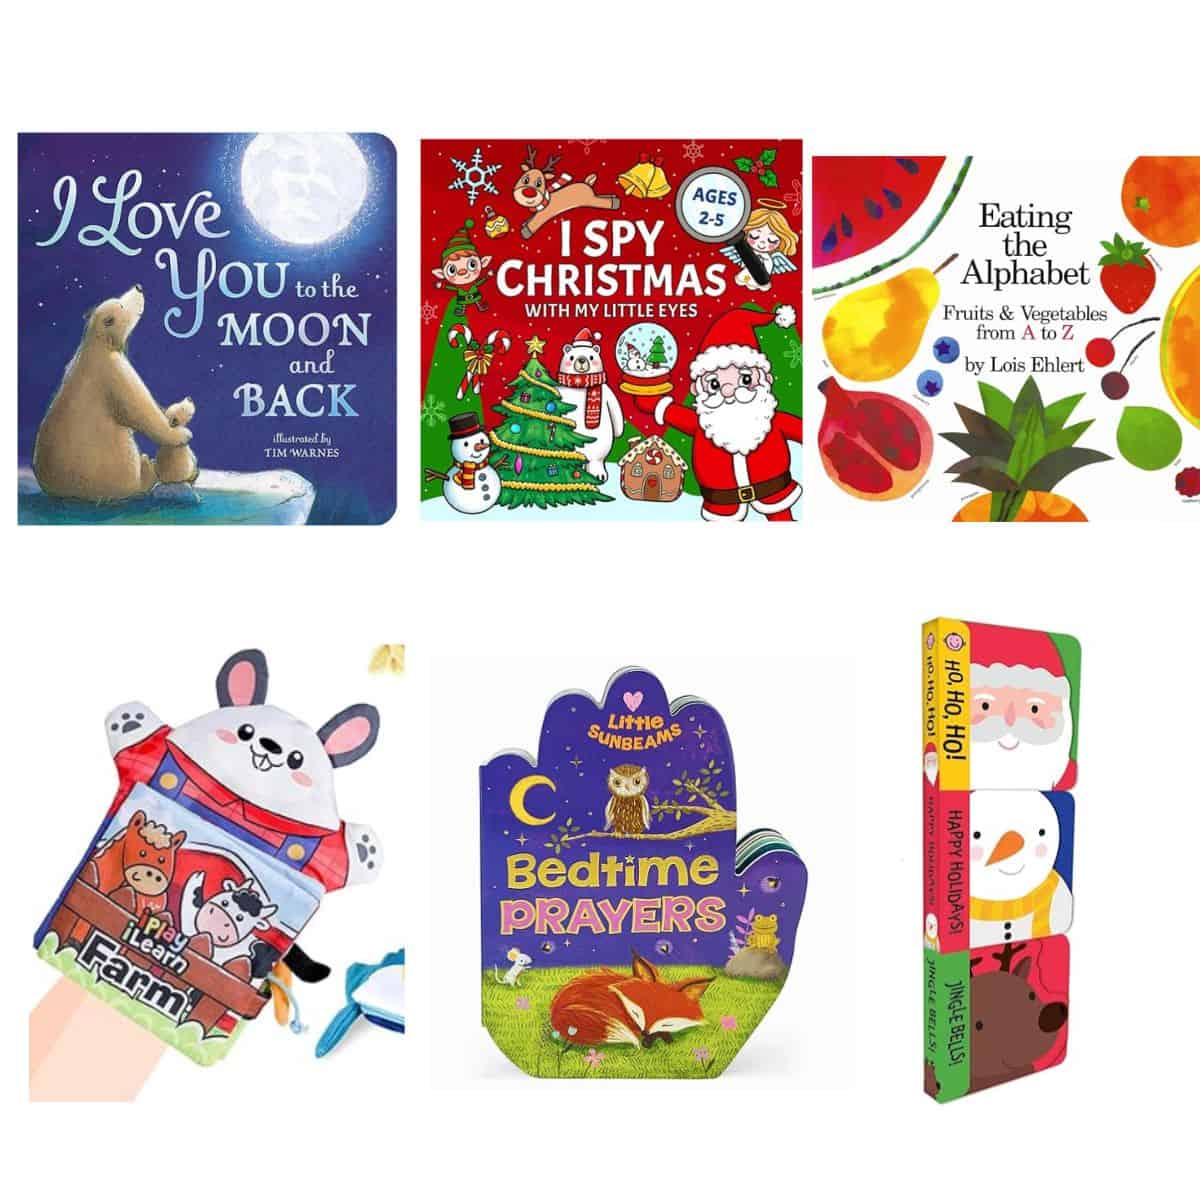 A collage of books for Christmas stockings.